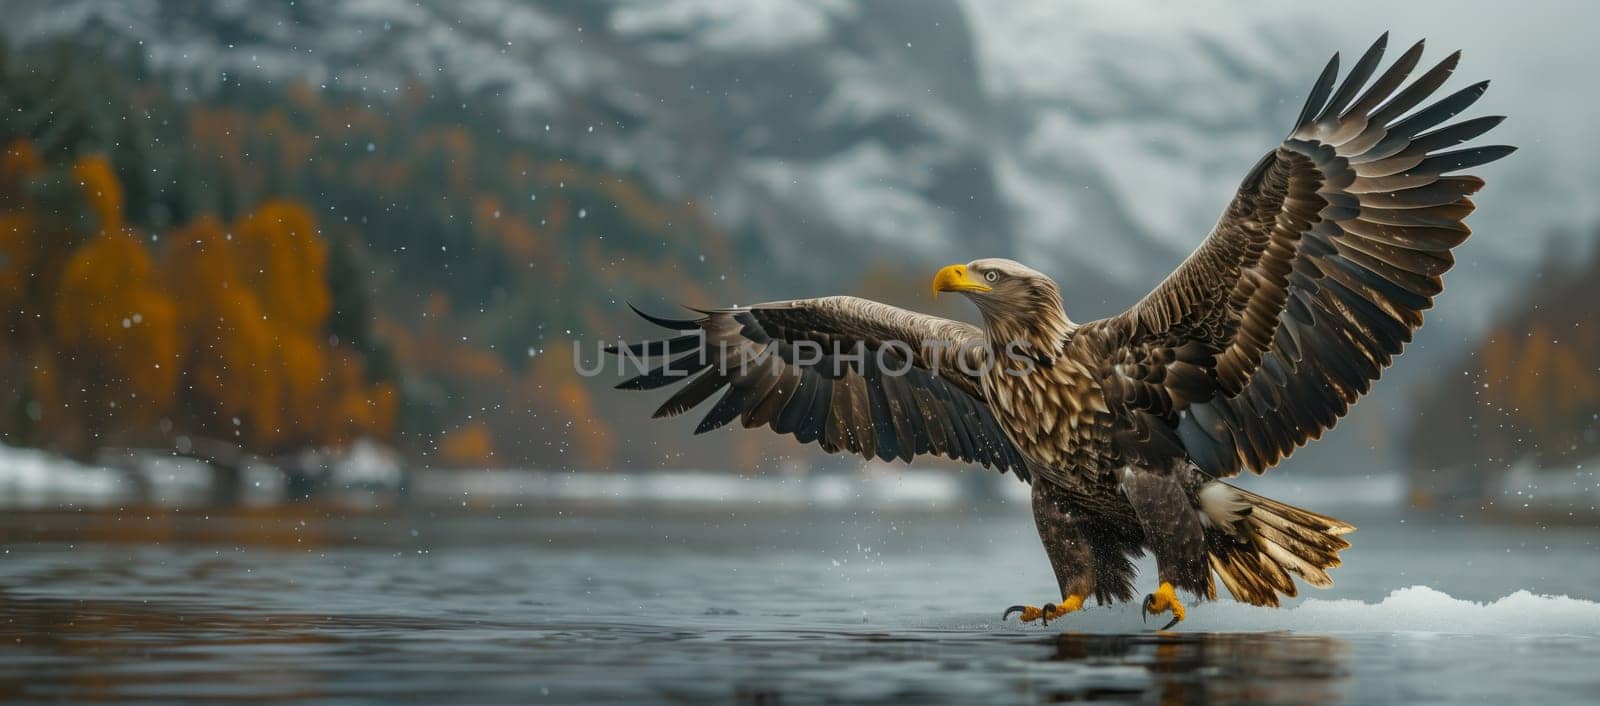 Accipitridae bird of prey, a bald eagle, flying over a lake with wings spread by richwolf